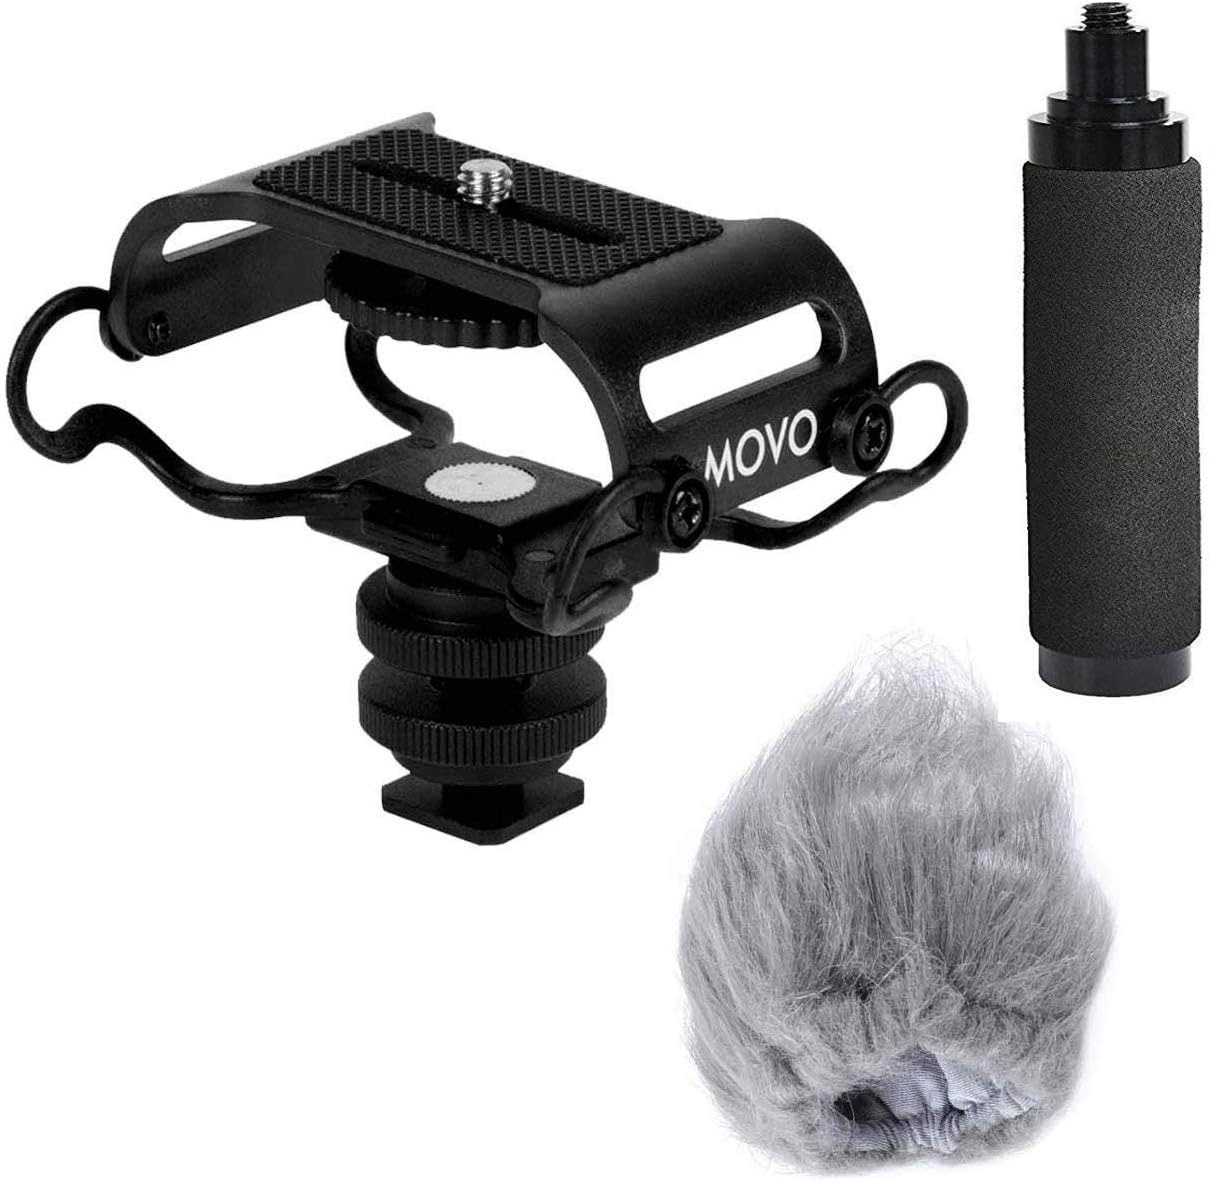 AEK-Z4 Handy Portable Recorder Accessory Kit with Mic Grip, Shock Mount, and Dea